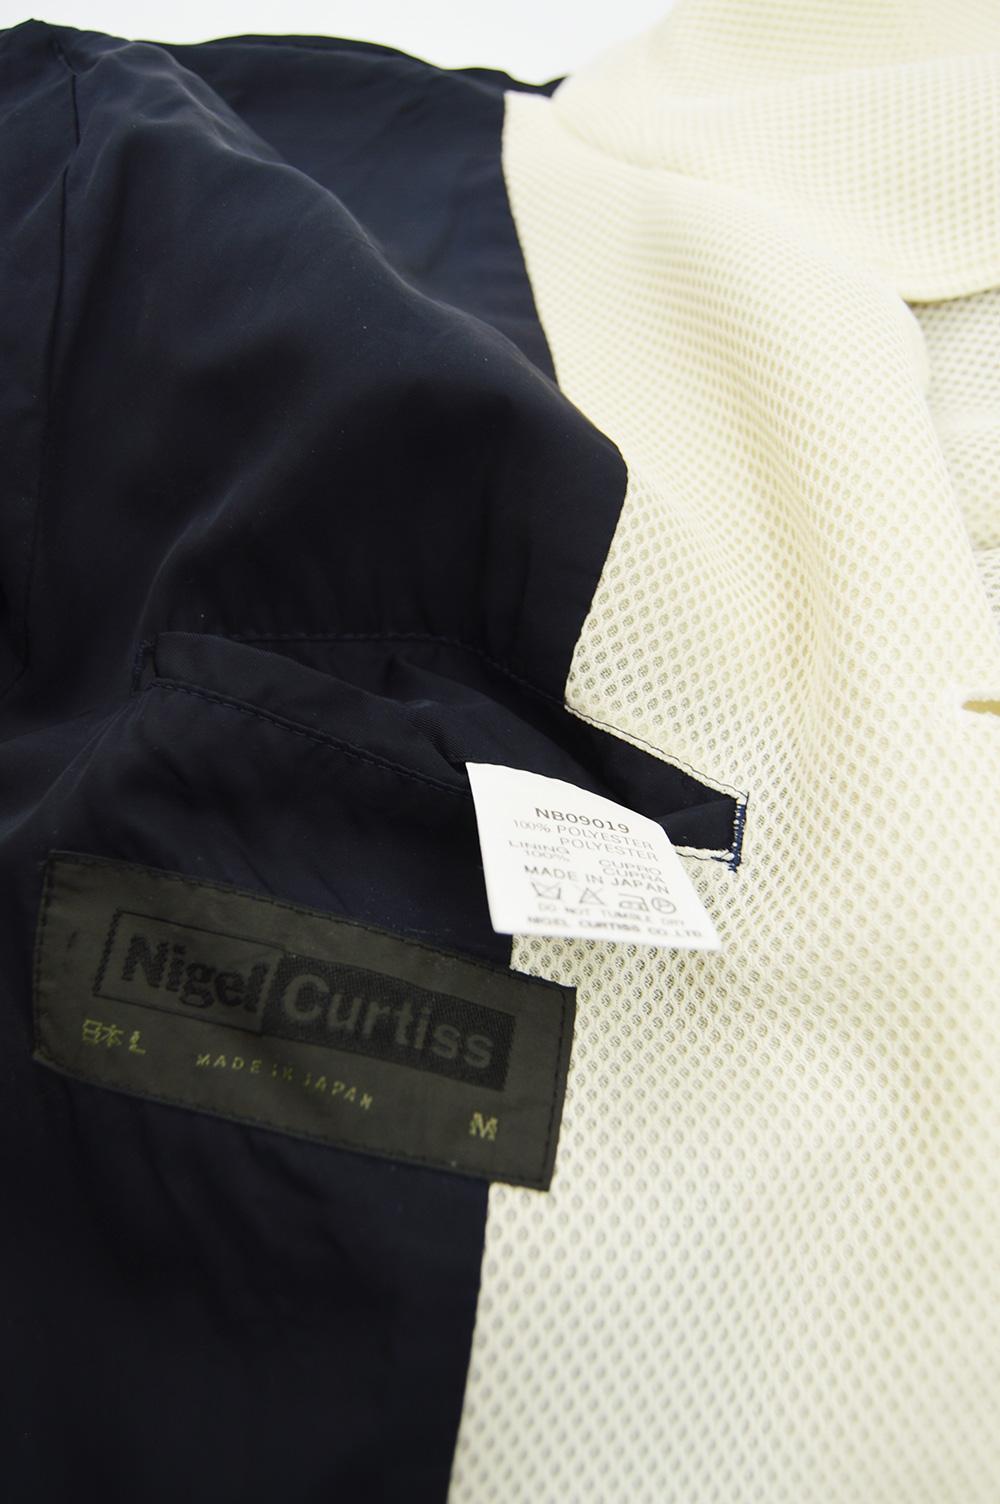 Nigel Curtiss Vintage Men's Japaese Cream Mesh Jacket, 1990s In Good Condition For Sale In Doncaster, South Yorkshire